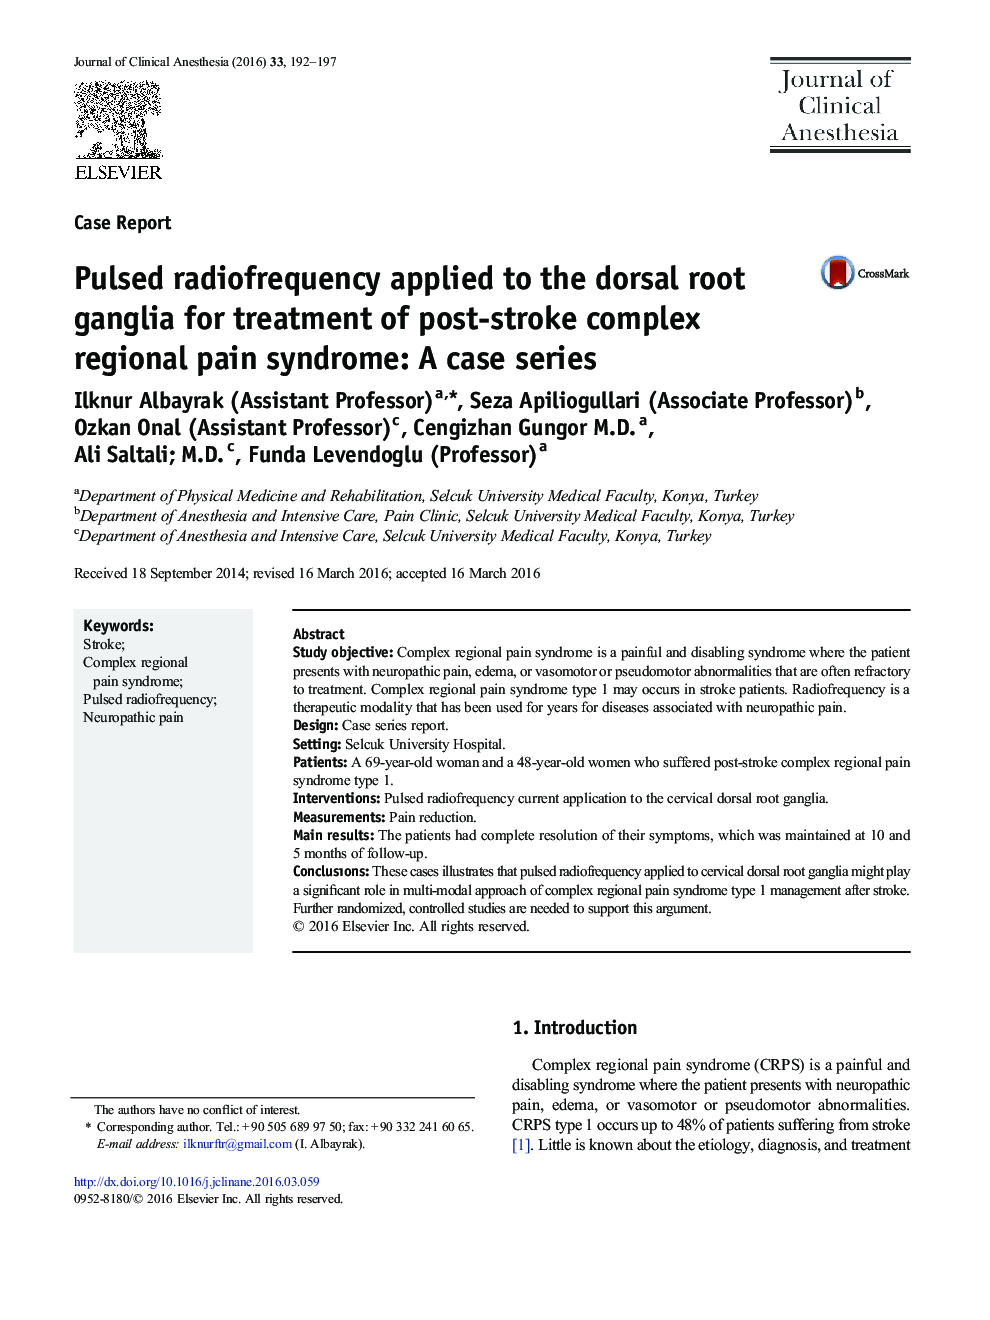 Pulsed radiofrequency applied to the dorsal root ganglia for treatment of post-stroke complex regional pain syndrome: A case series 